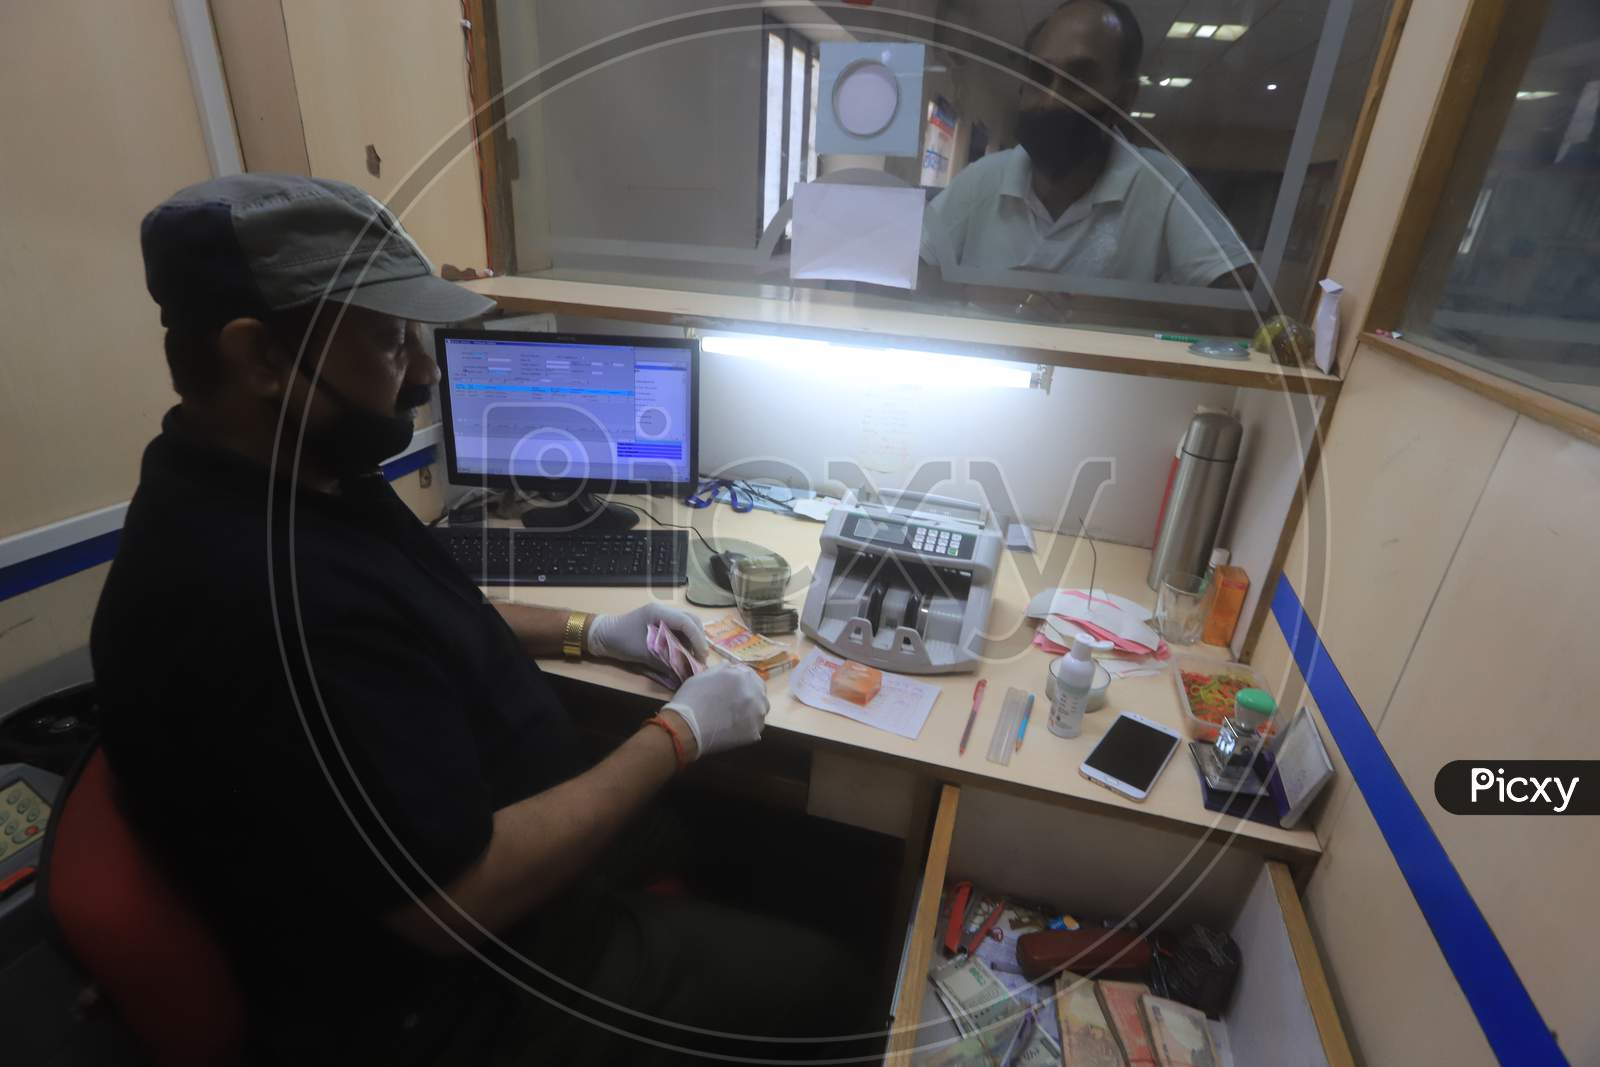 A bank employee working inside a bank during a 21-day nationwide lockdown to limit the spreading of coronavirus disease (COVID-19), Prayagraj, April 3, 2020.